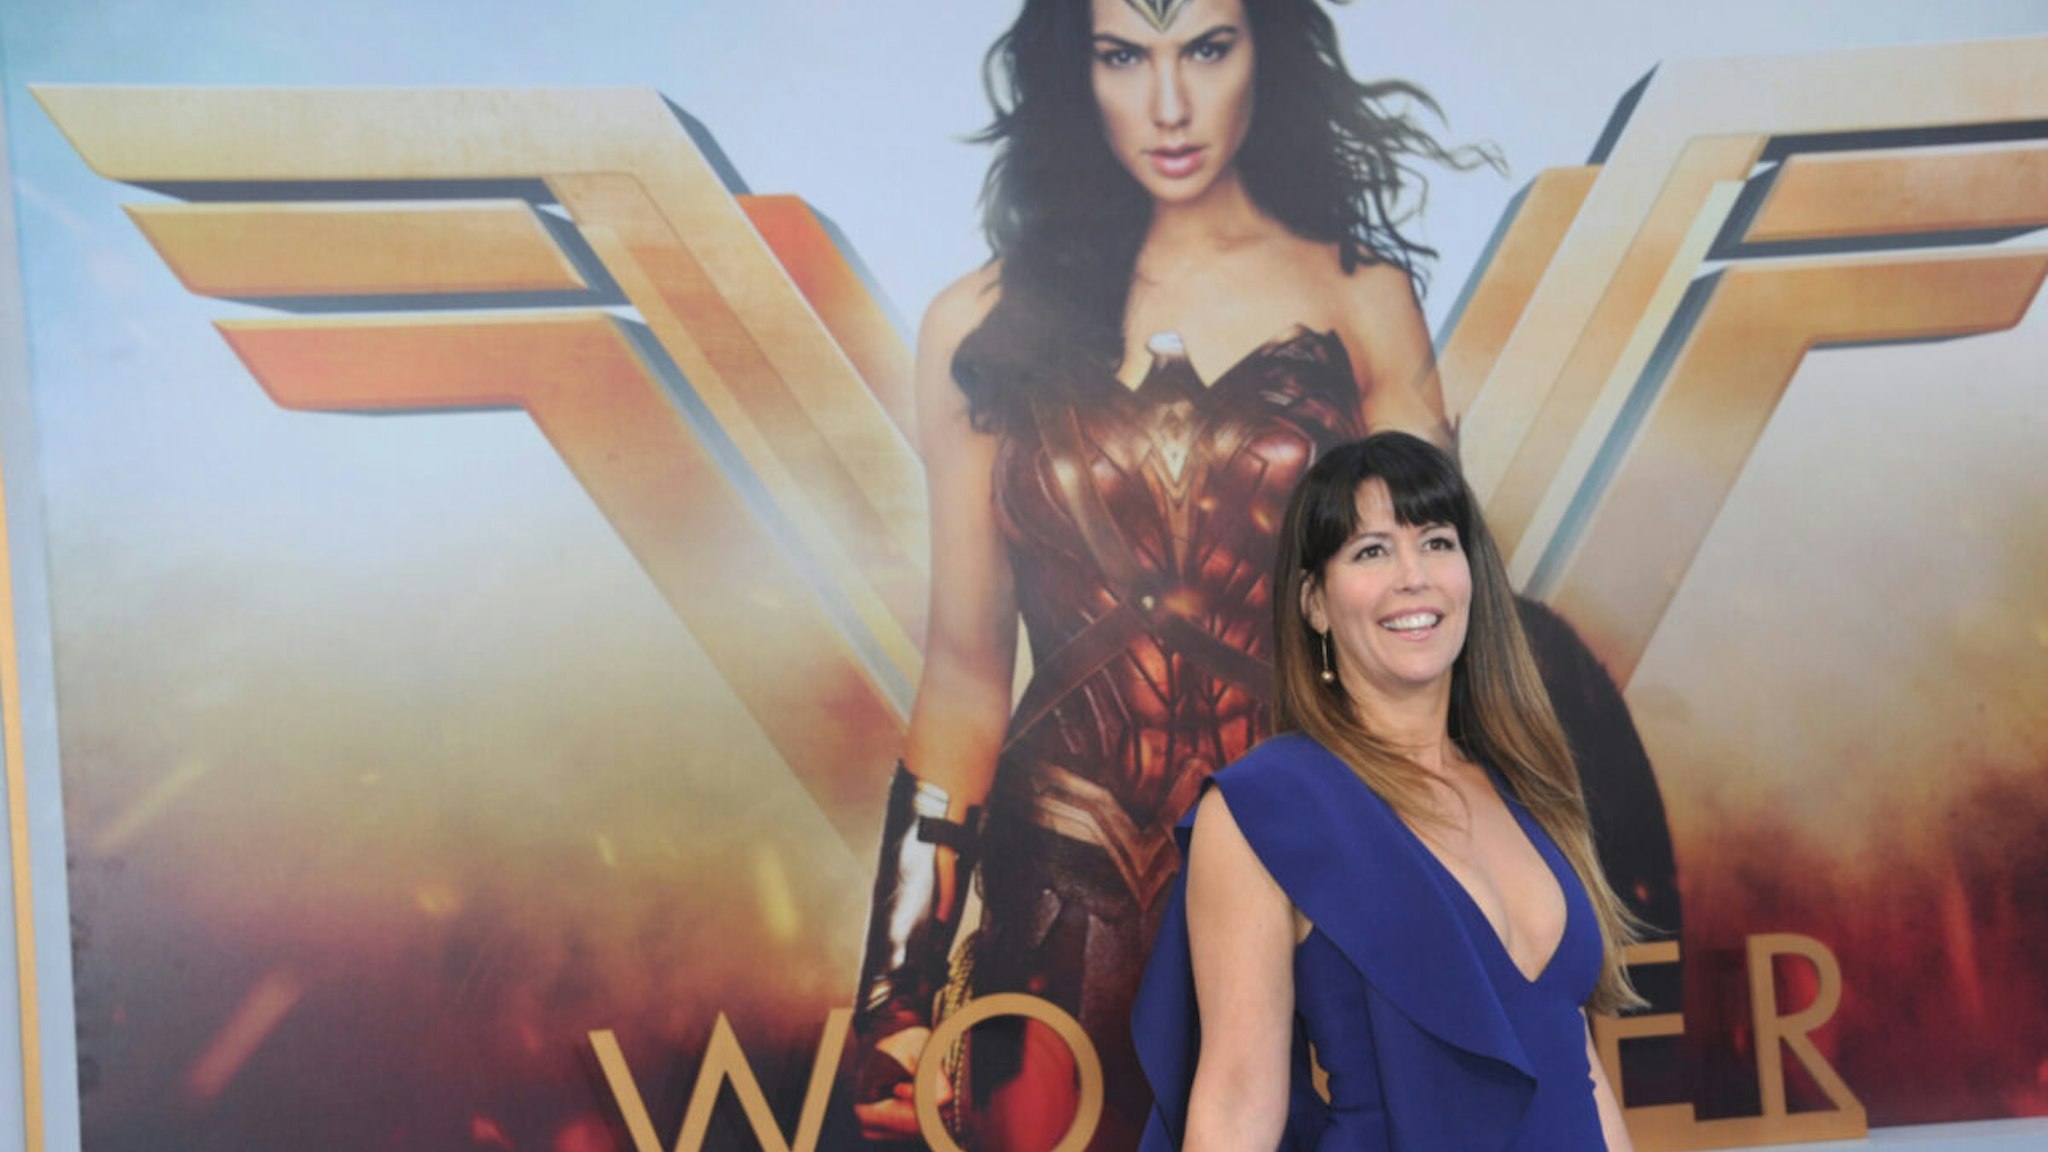 Director Patty Jenkins arrives for the Premiere Of Warner Bros. Pictures' "Wonder Woman" held at the Pantages Theatre on May 25, 2017 in Hollywood, California.